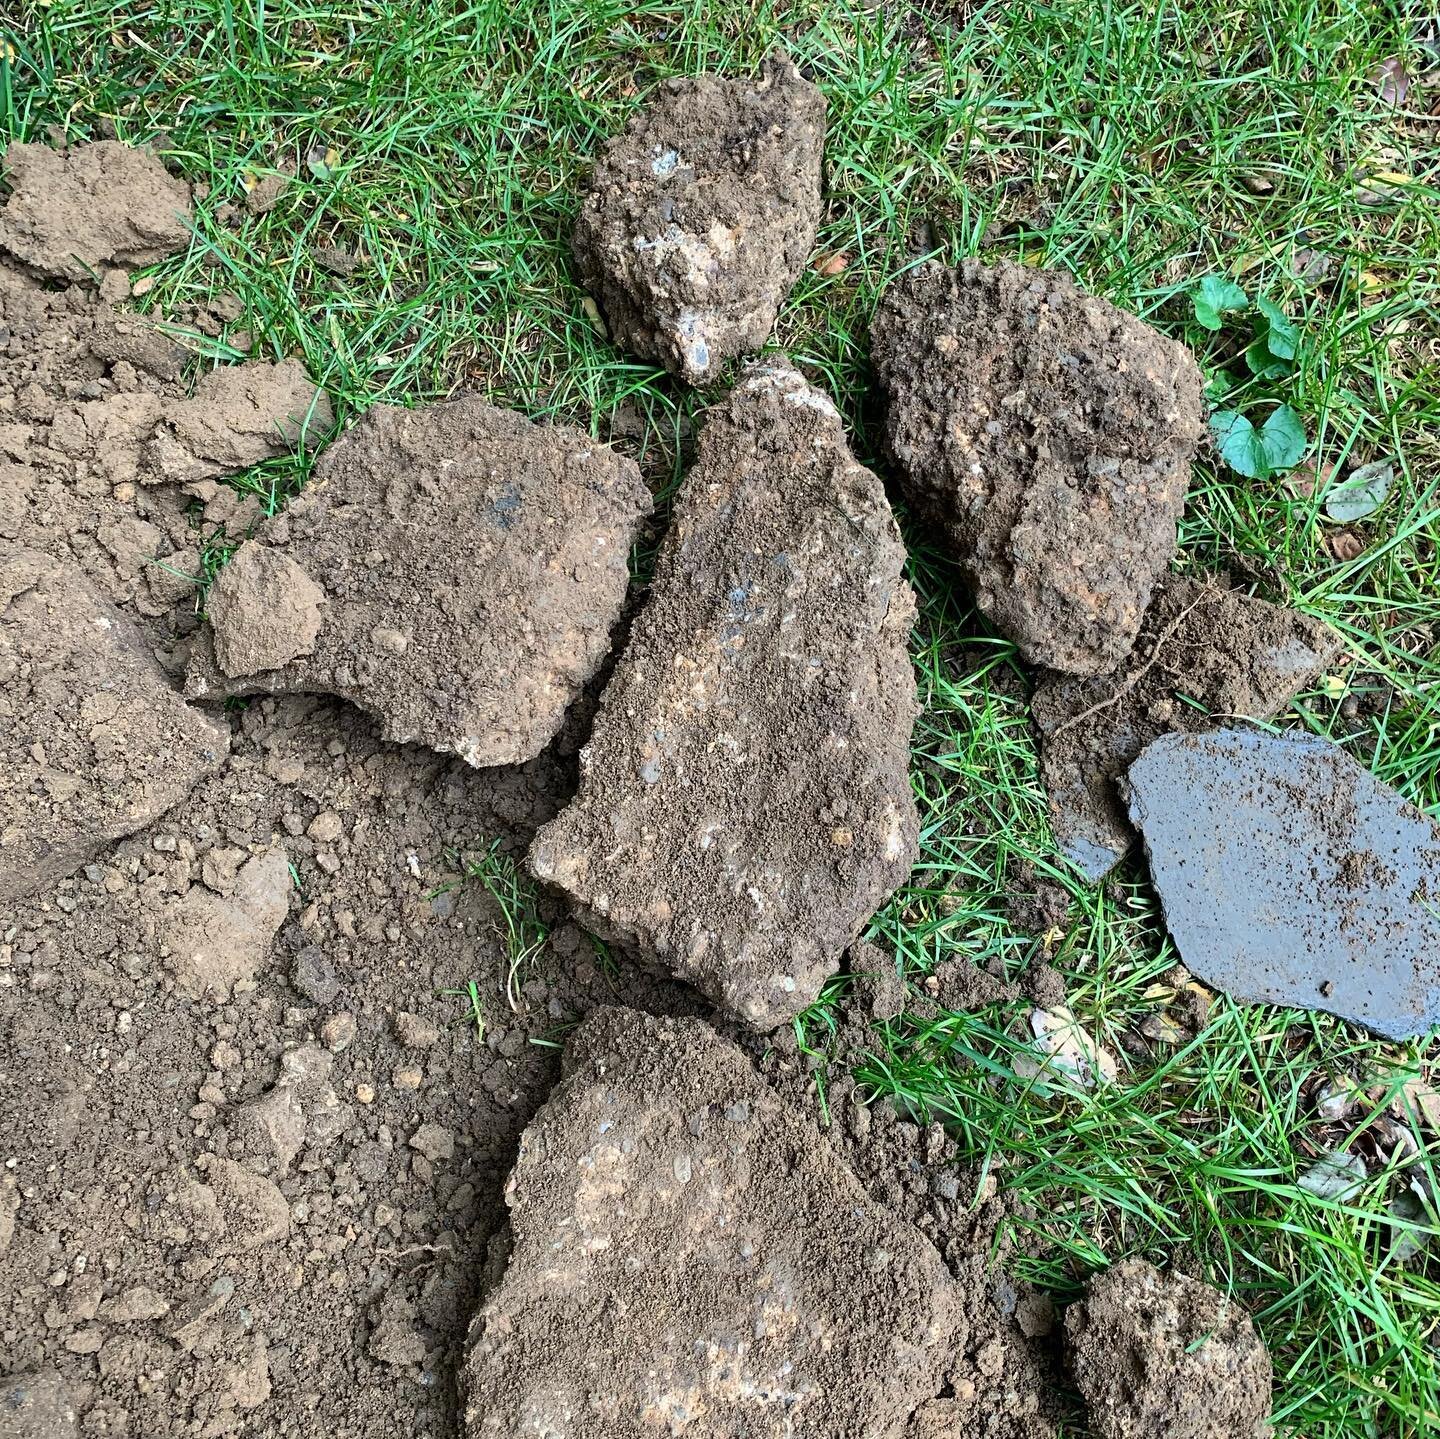 Decommissioned/crushed septic tank. 

Found an area of concern in the backyard up in Oradell. It was in line with the waste line and we suspected that it was possibly an old septic tank since they were common in this area. 

When we dug down we insta